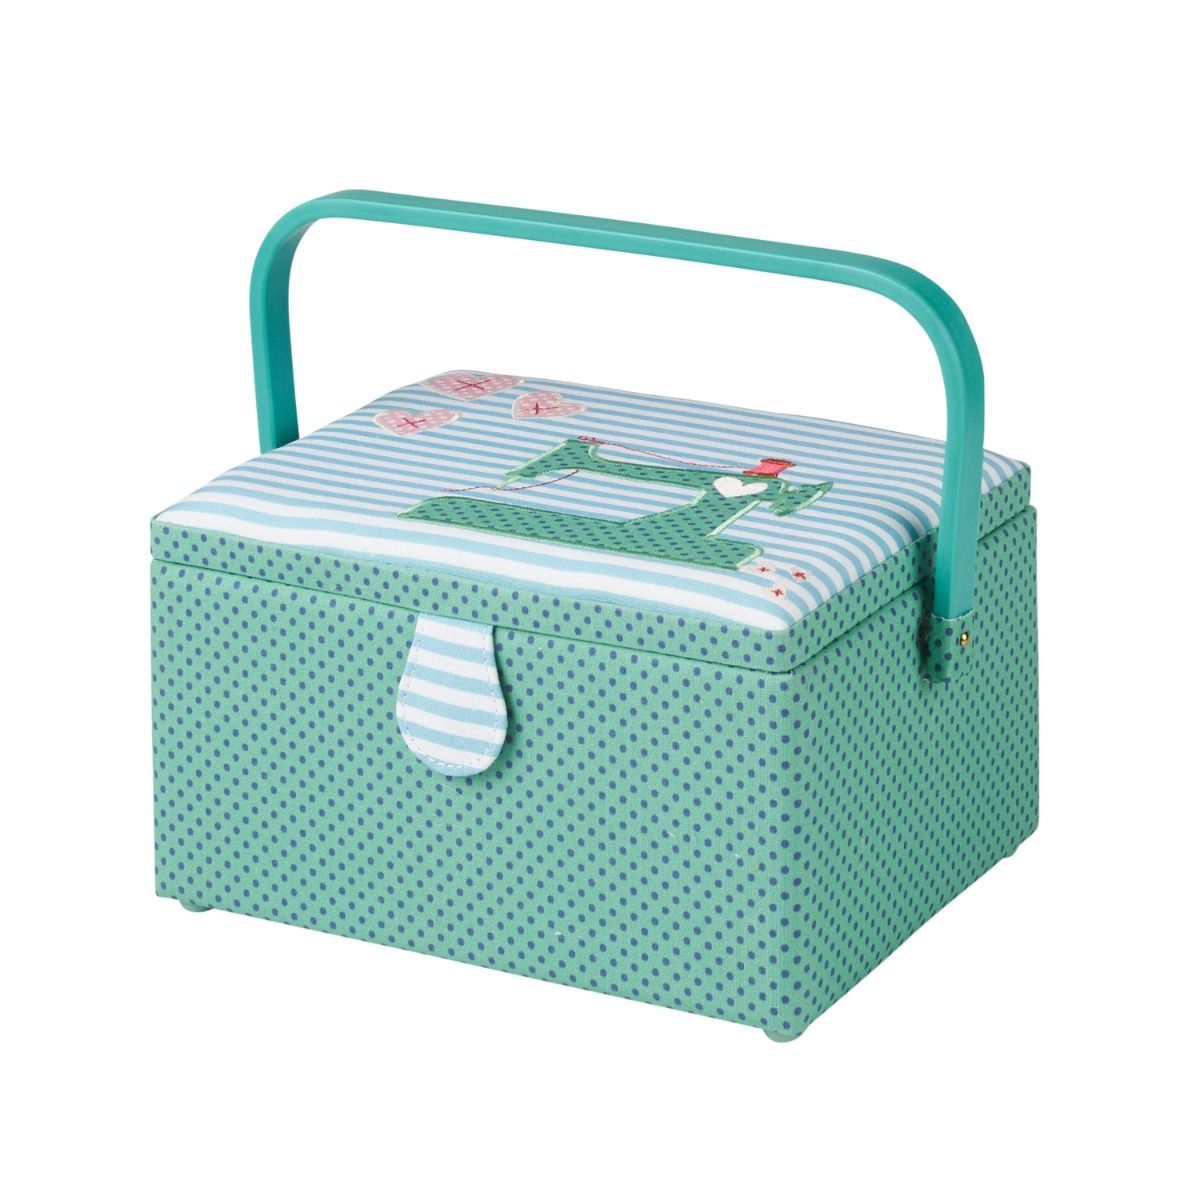 Medium Sewing Box - With Compartments | Sewing Online Medium 